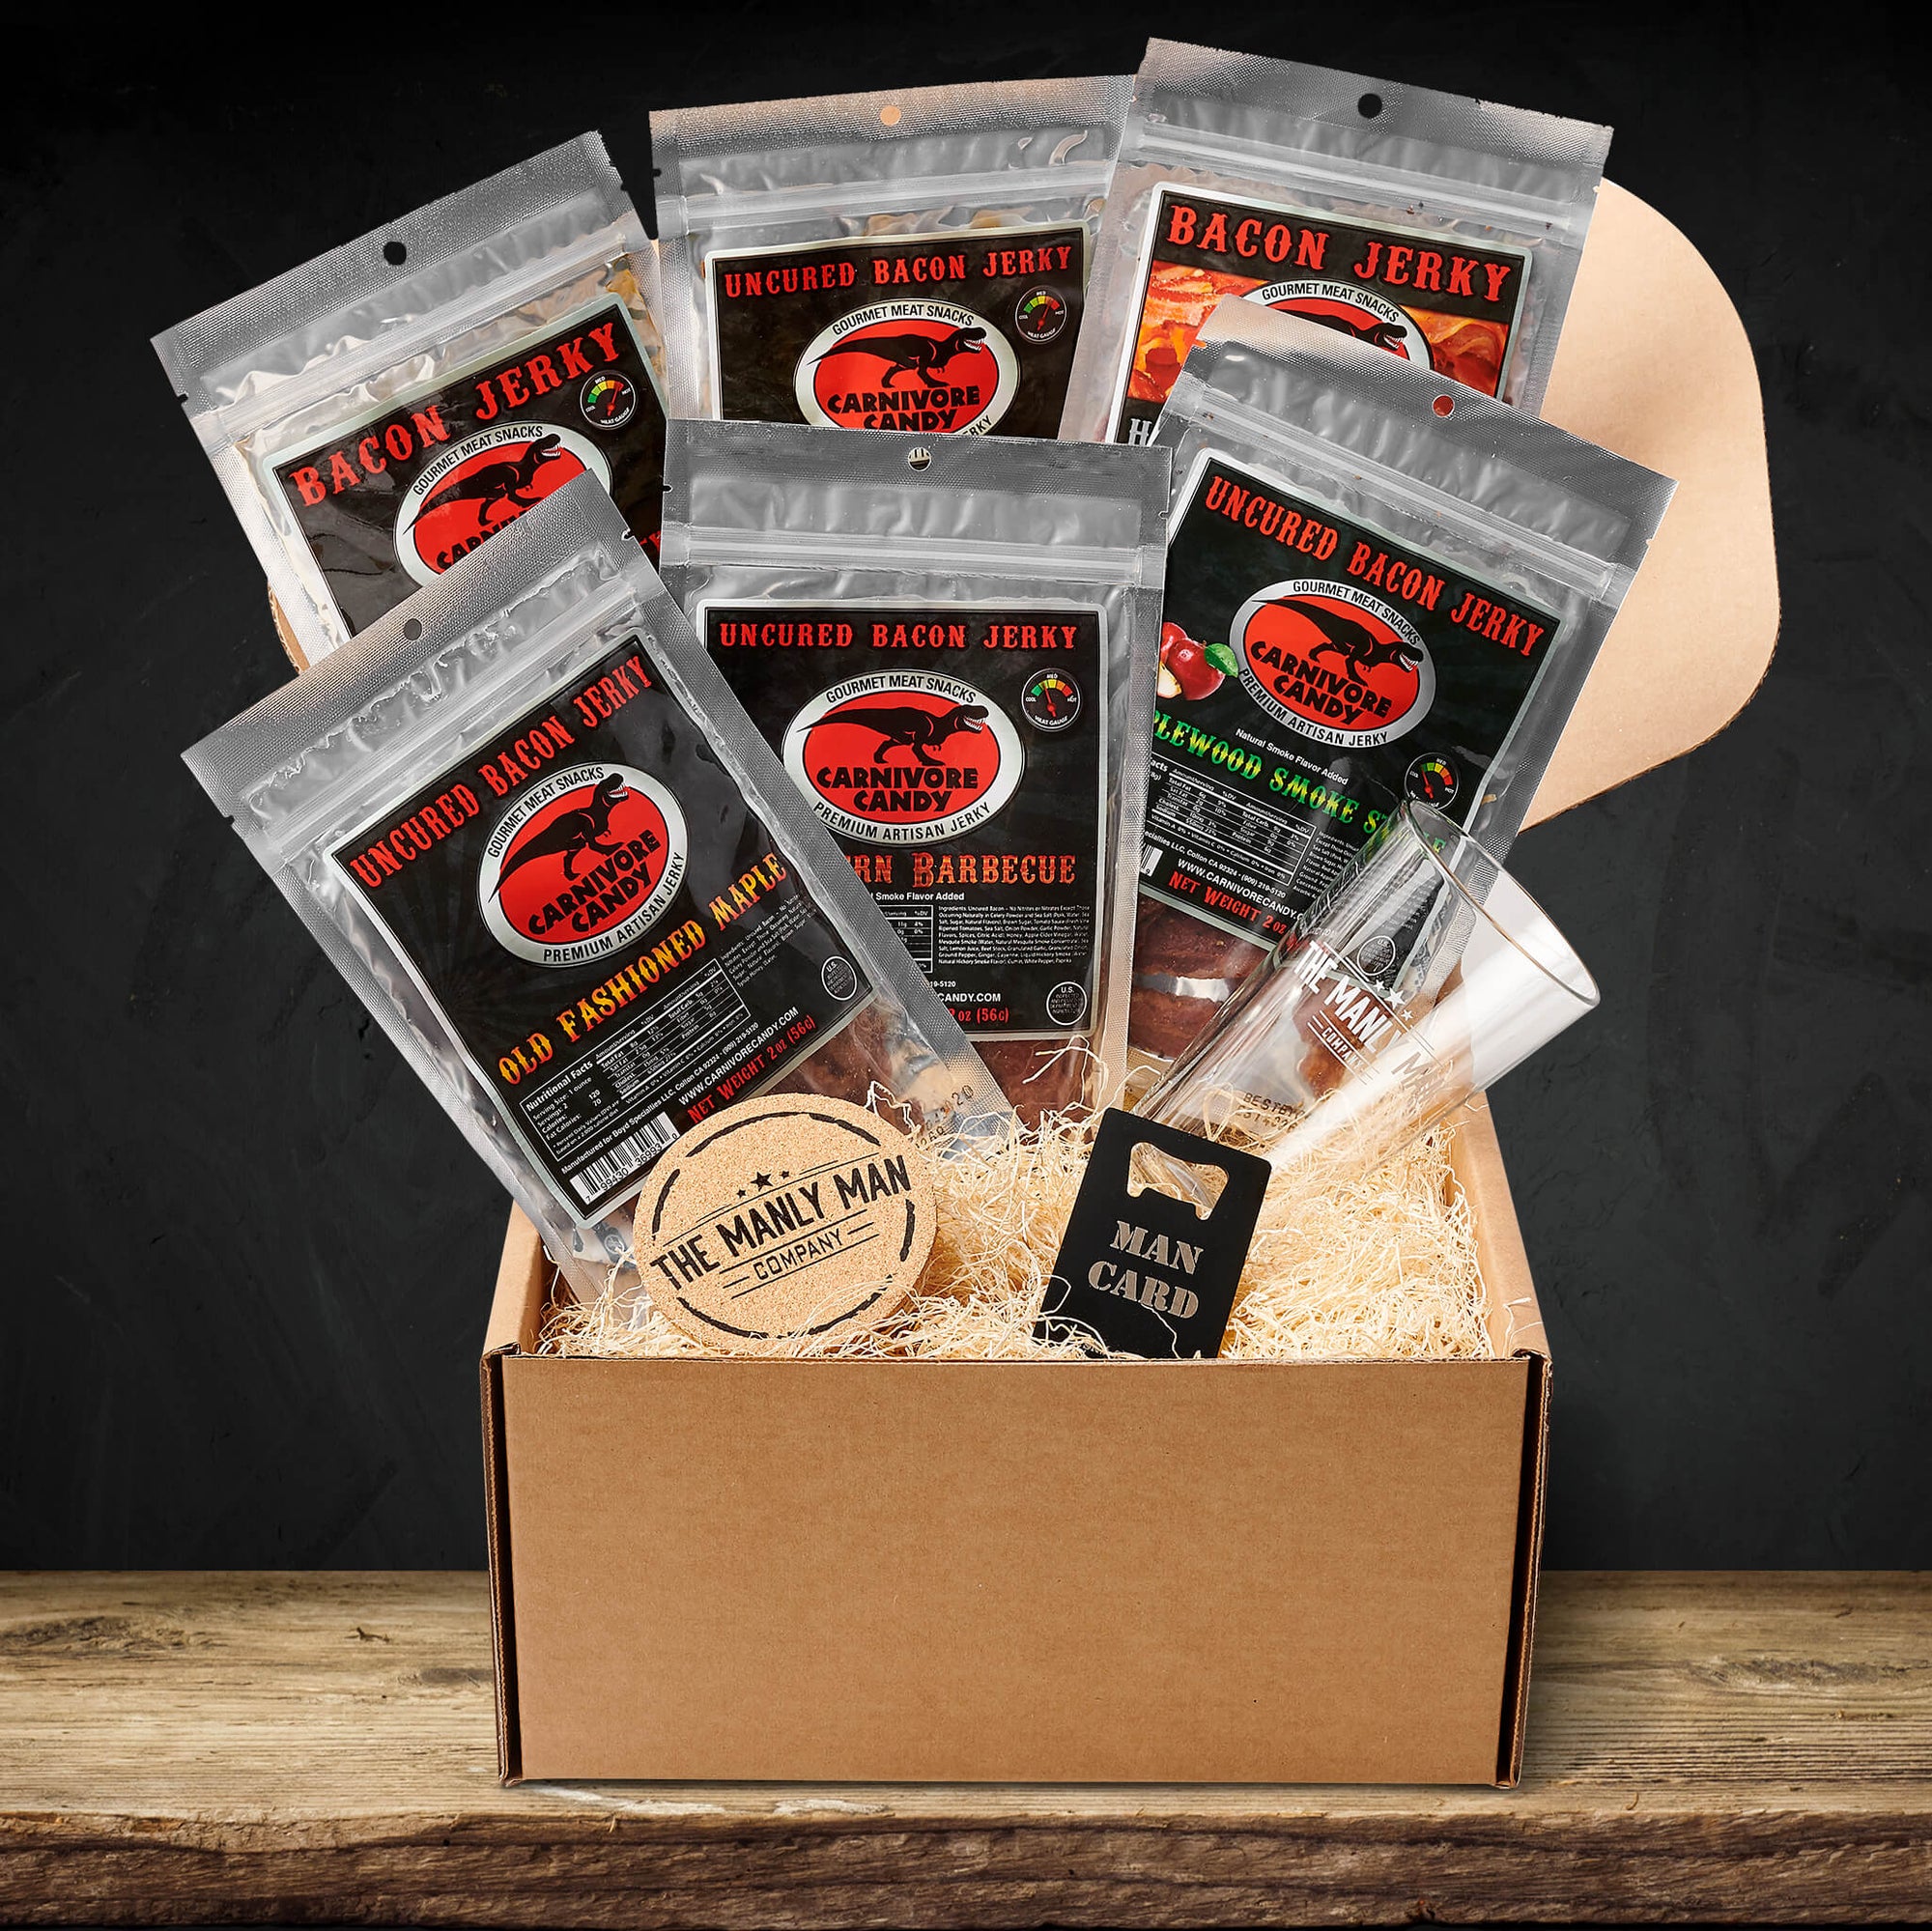 This gift box comes with a variety of bacon jerky flavors, a coaster, a bottle opener and a pint glass. 